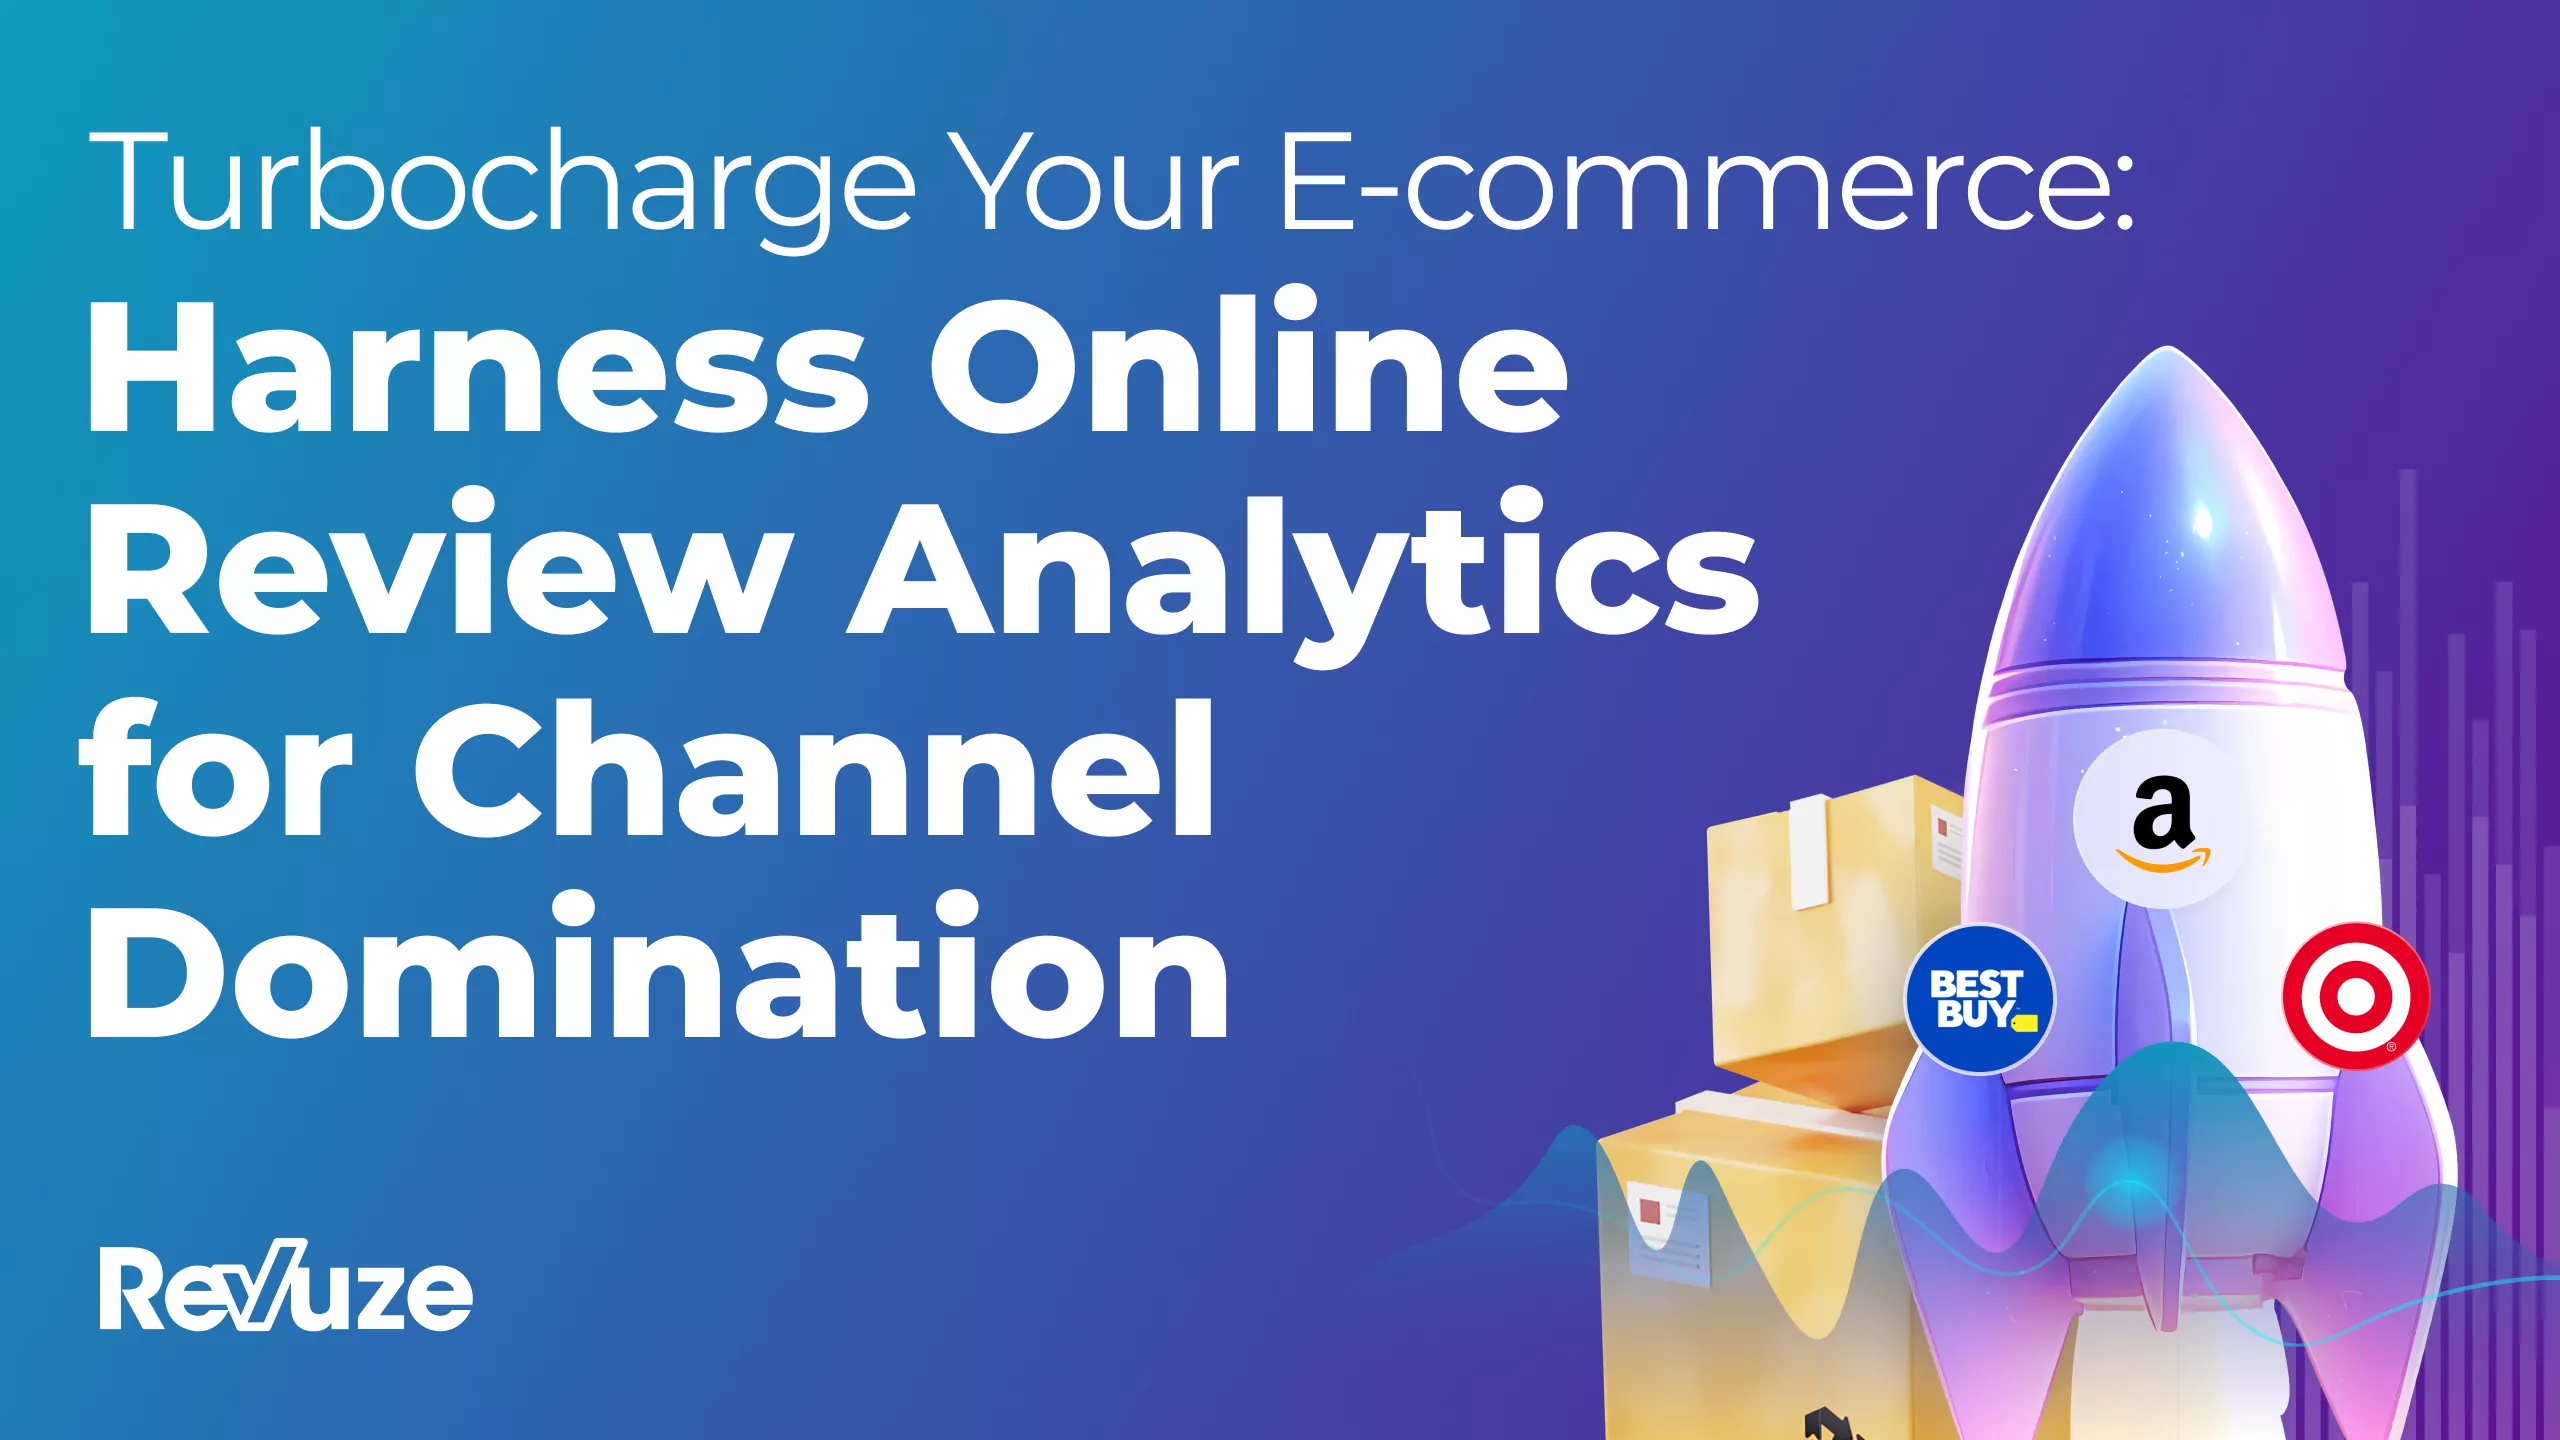 Turbocharge Your E-commerce: Harness Online Review Analytics for Channel Domination